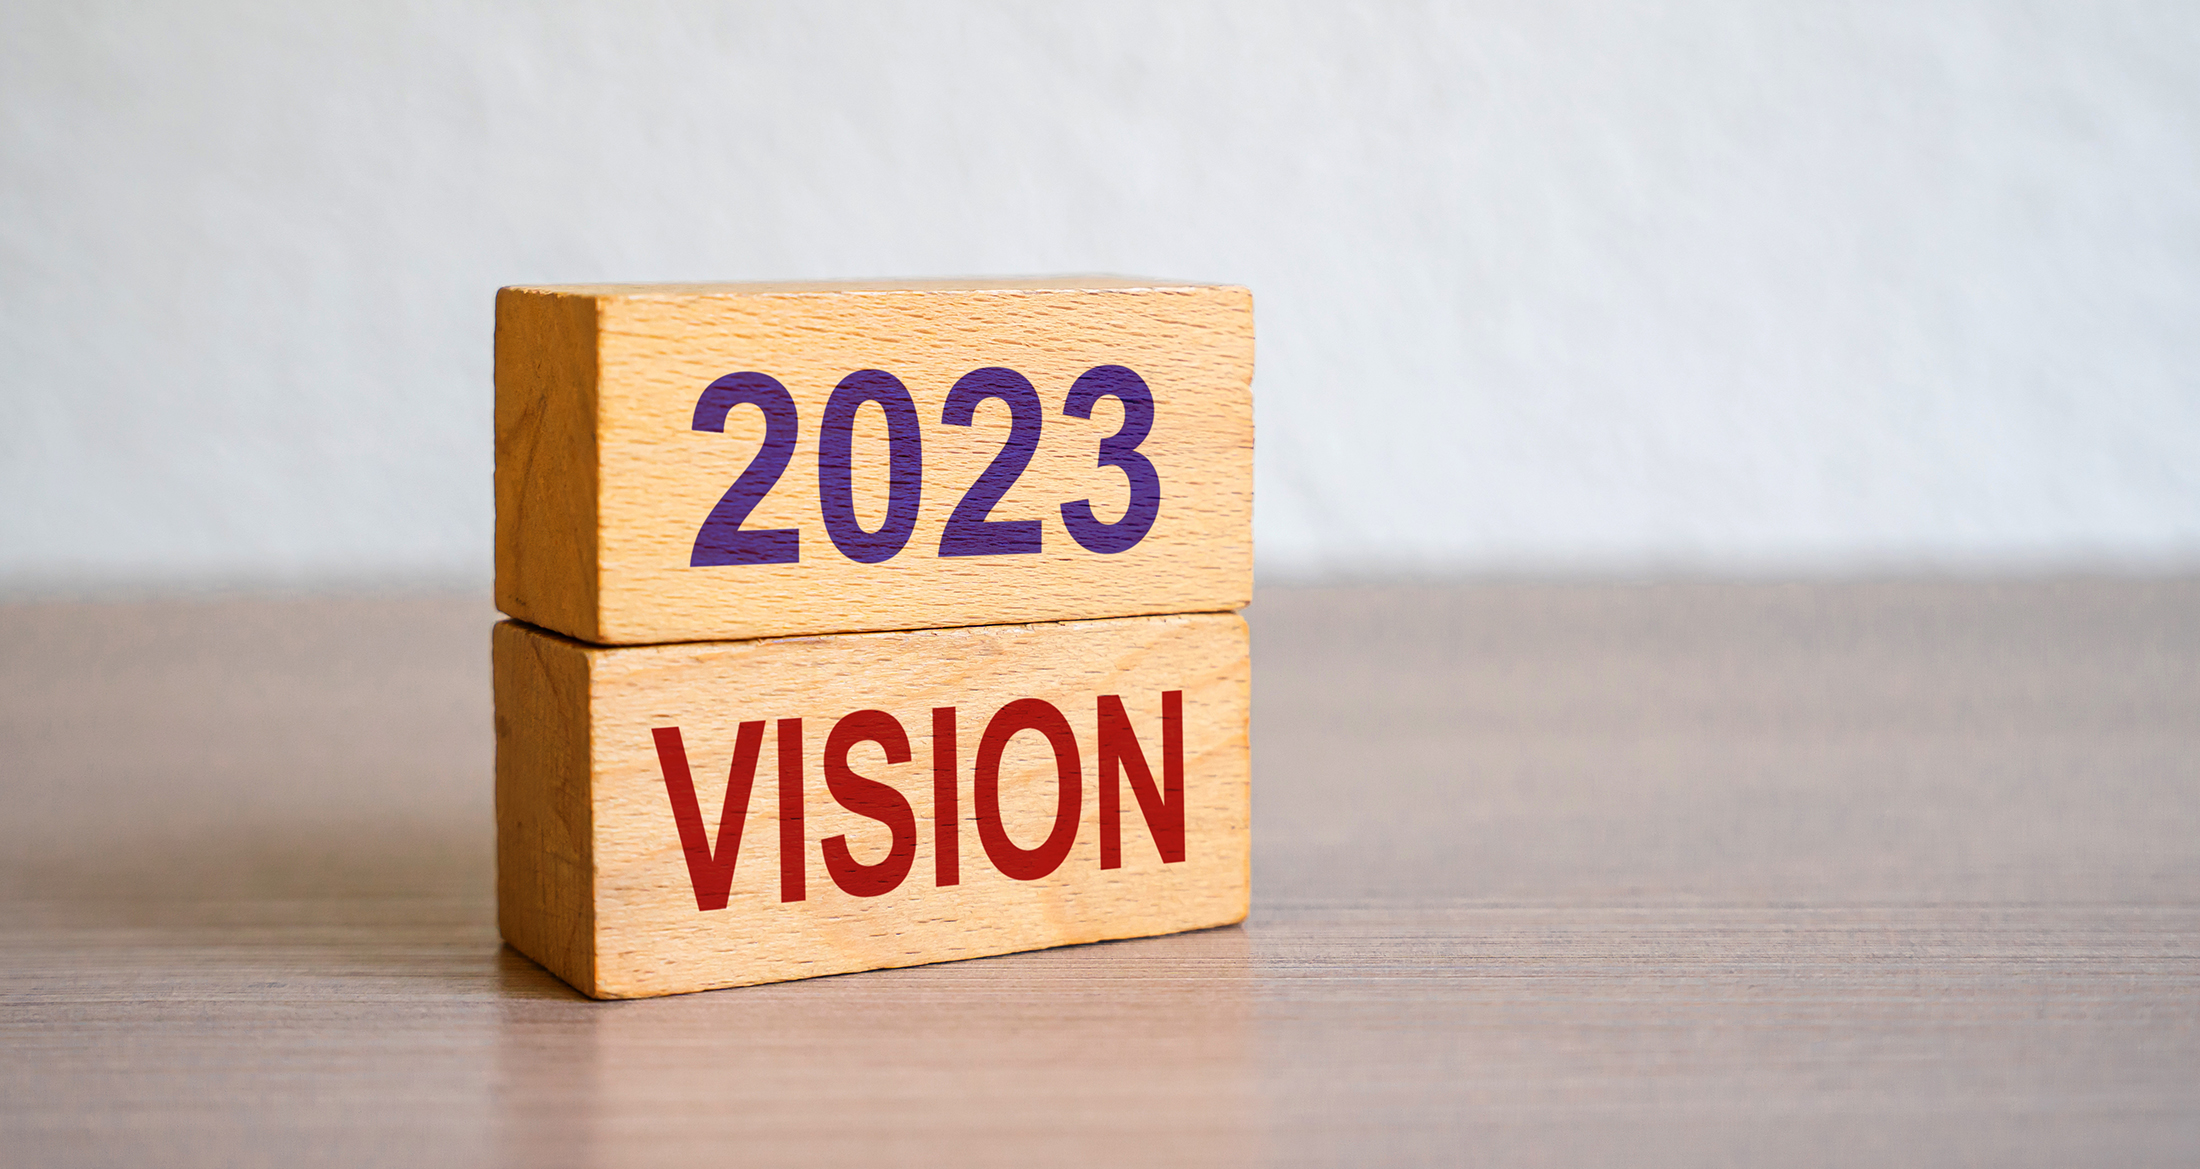 Hand puts blocks with the words 2023 Vision. Concept for business ideas and goals. Strategy development. Planning and action plan. Performance, motivation and company management.